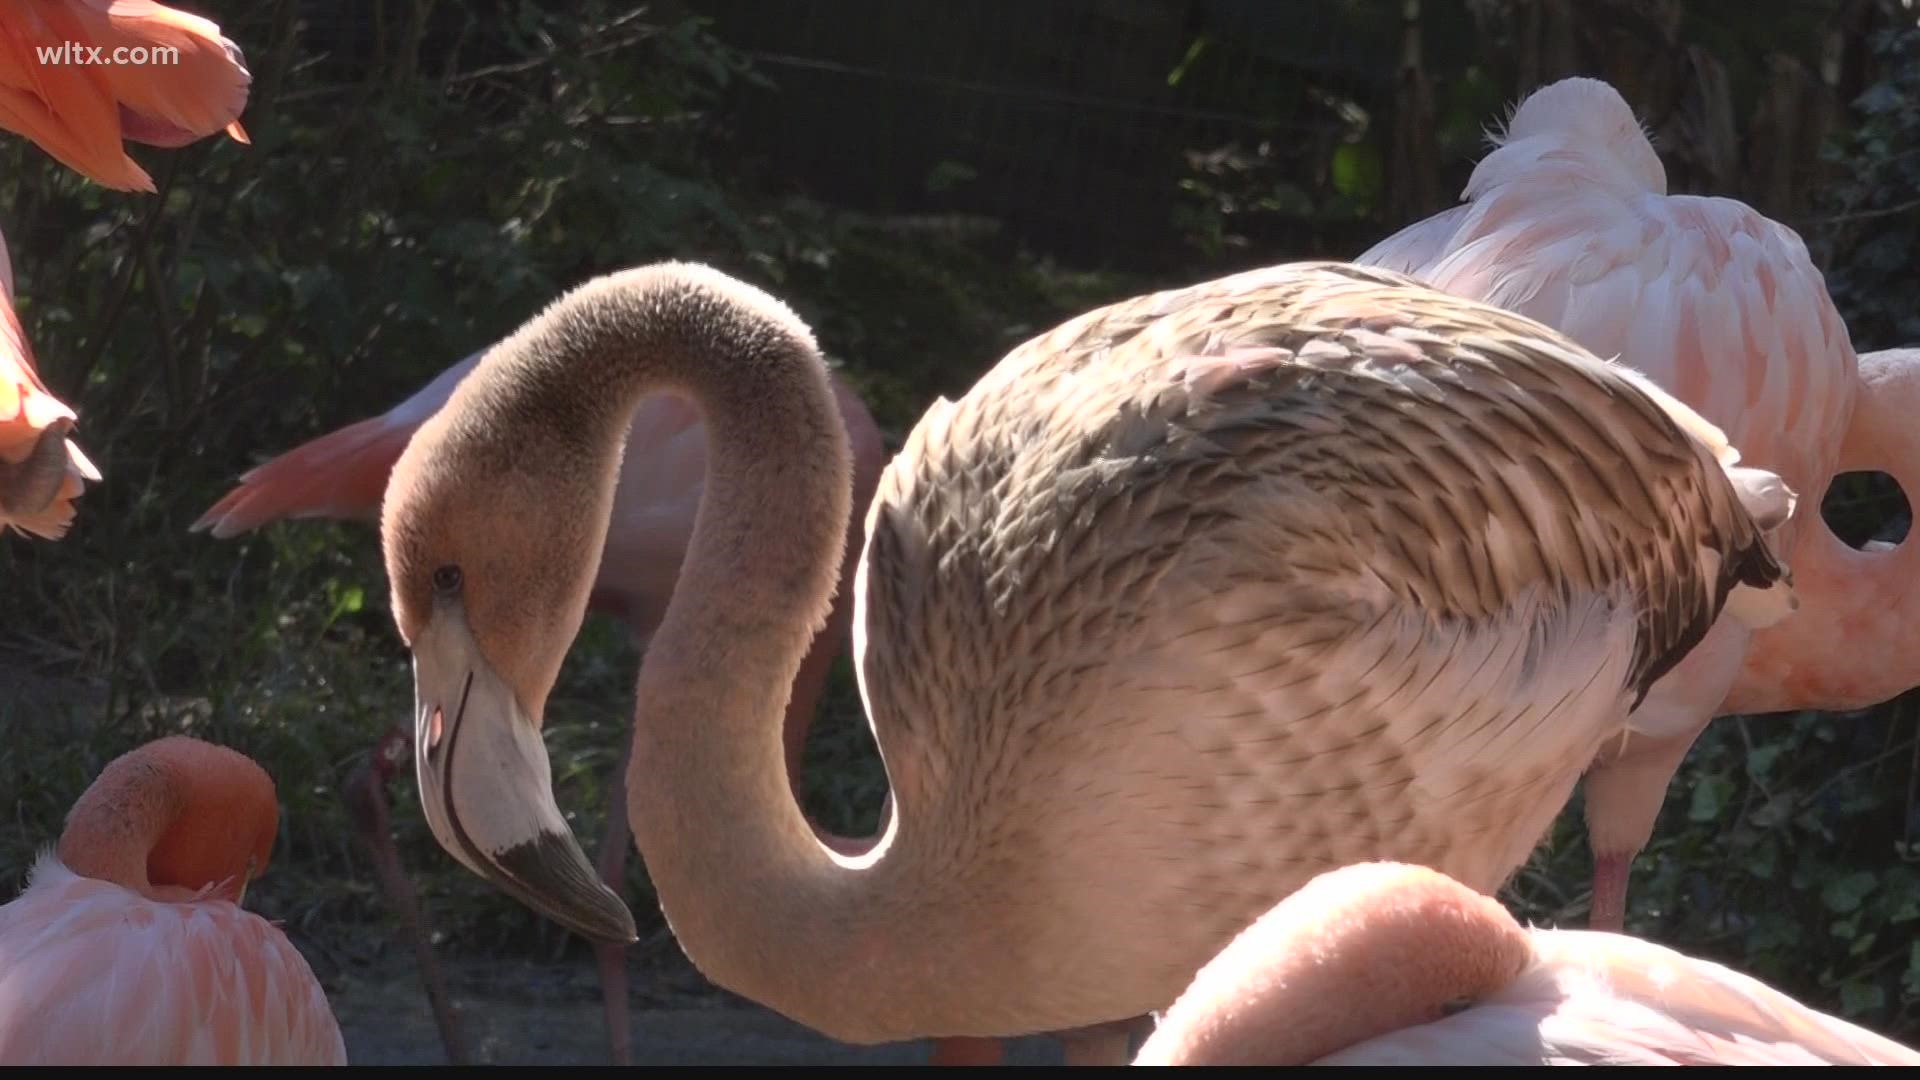 When the Flamingo babies start turning pink its time for annual checkups on animals at the zoo.